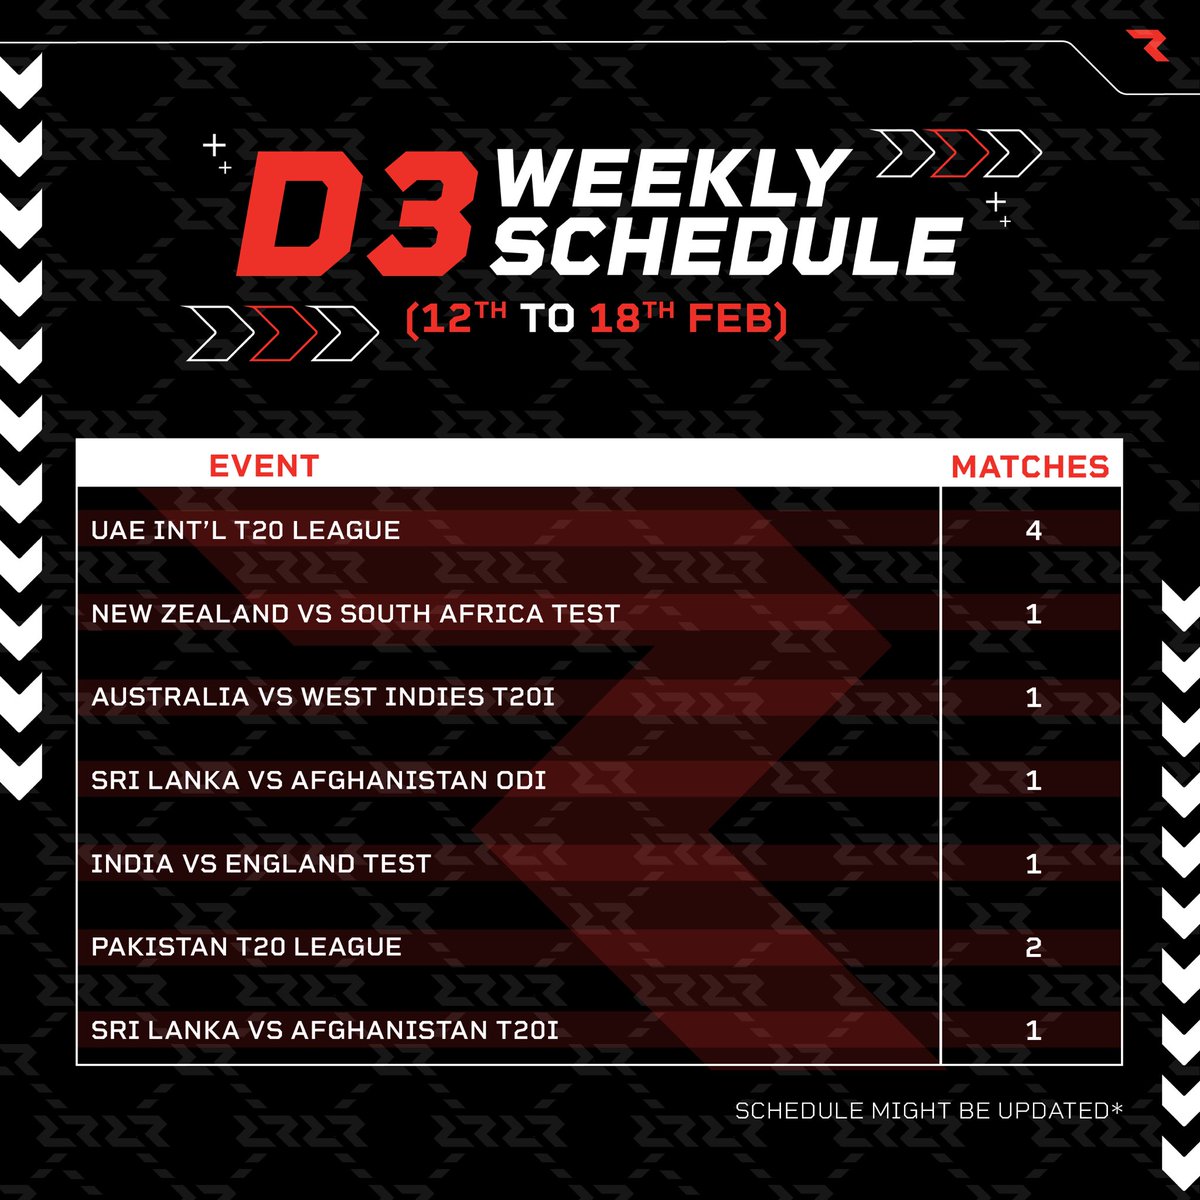 This Week’s D3 Schedule is Out Now 👇